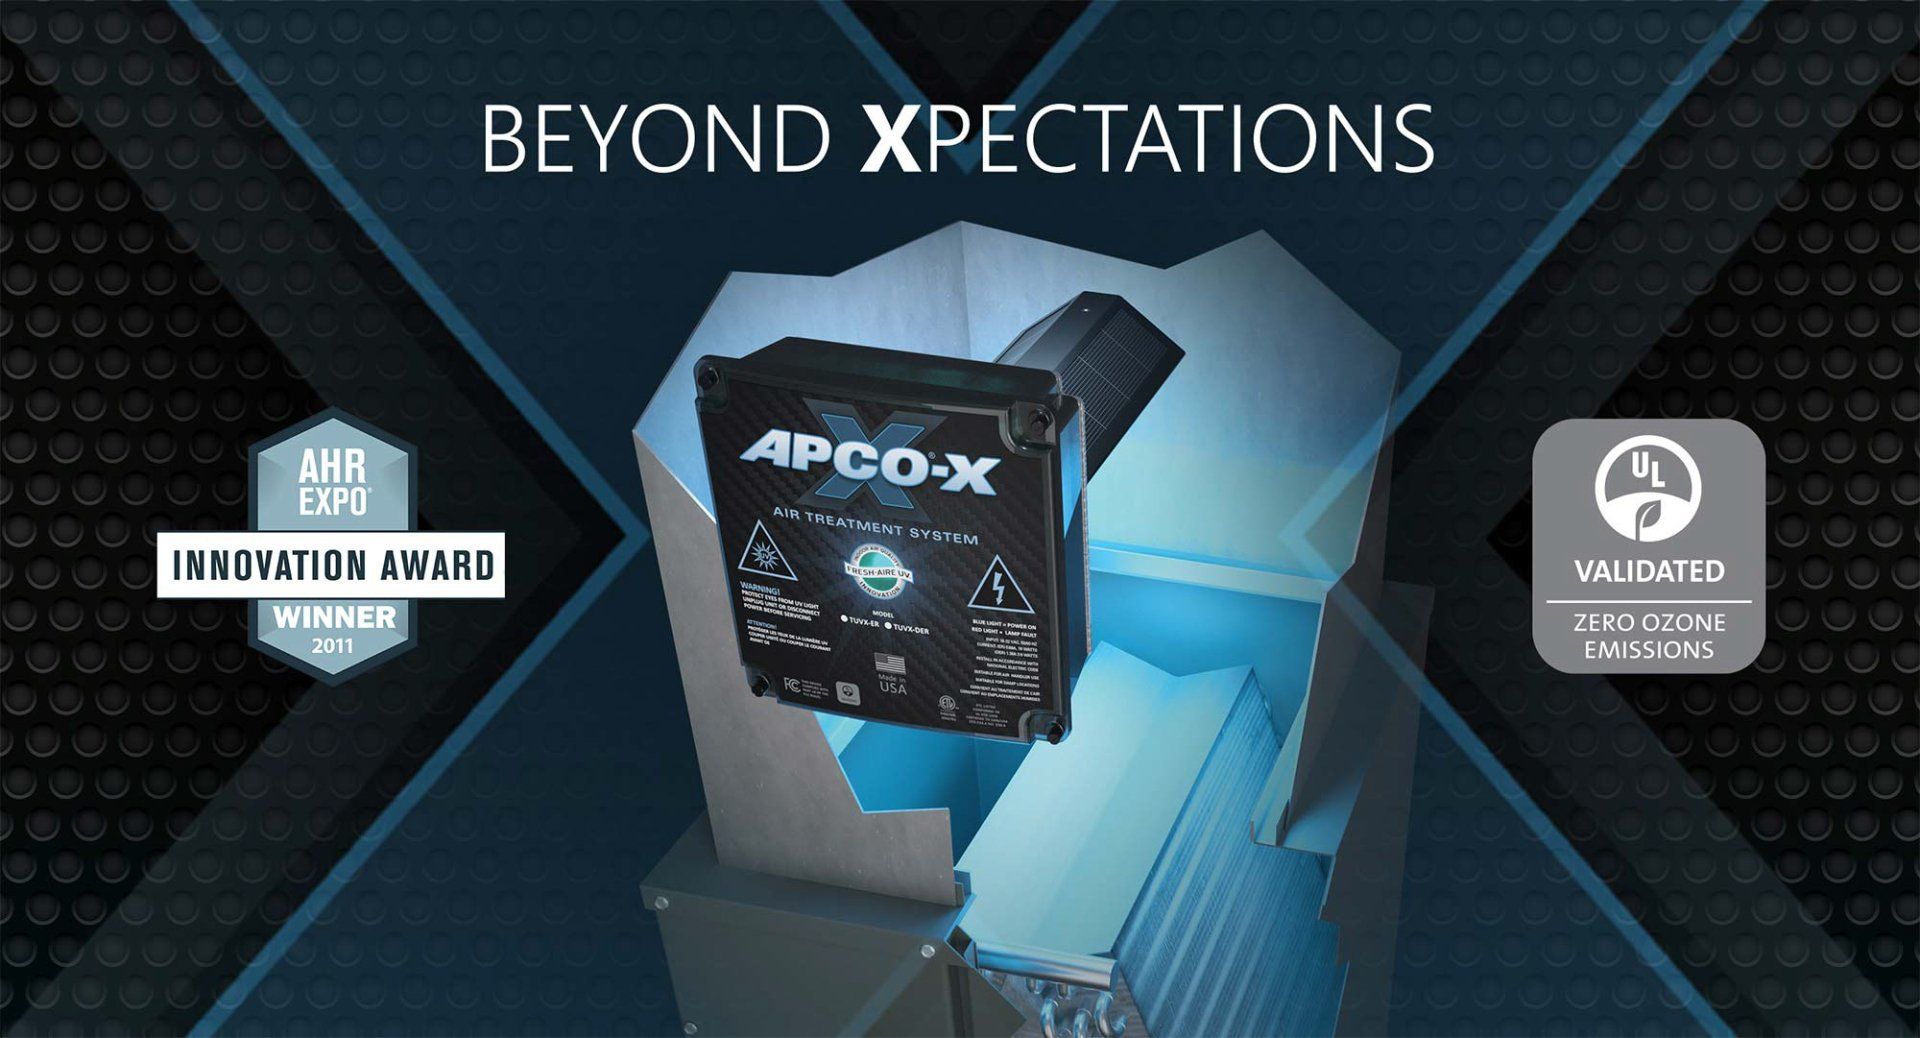 beyond_xpectations_APCO-X